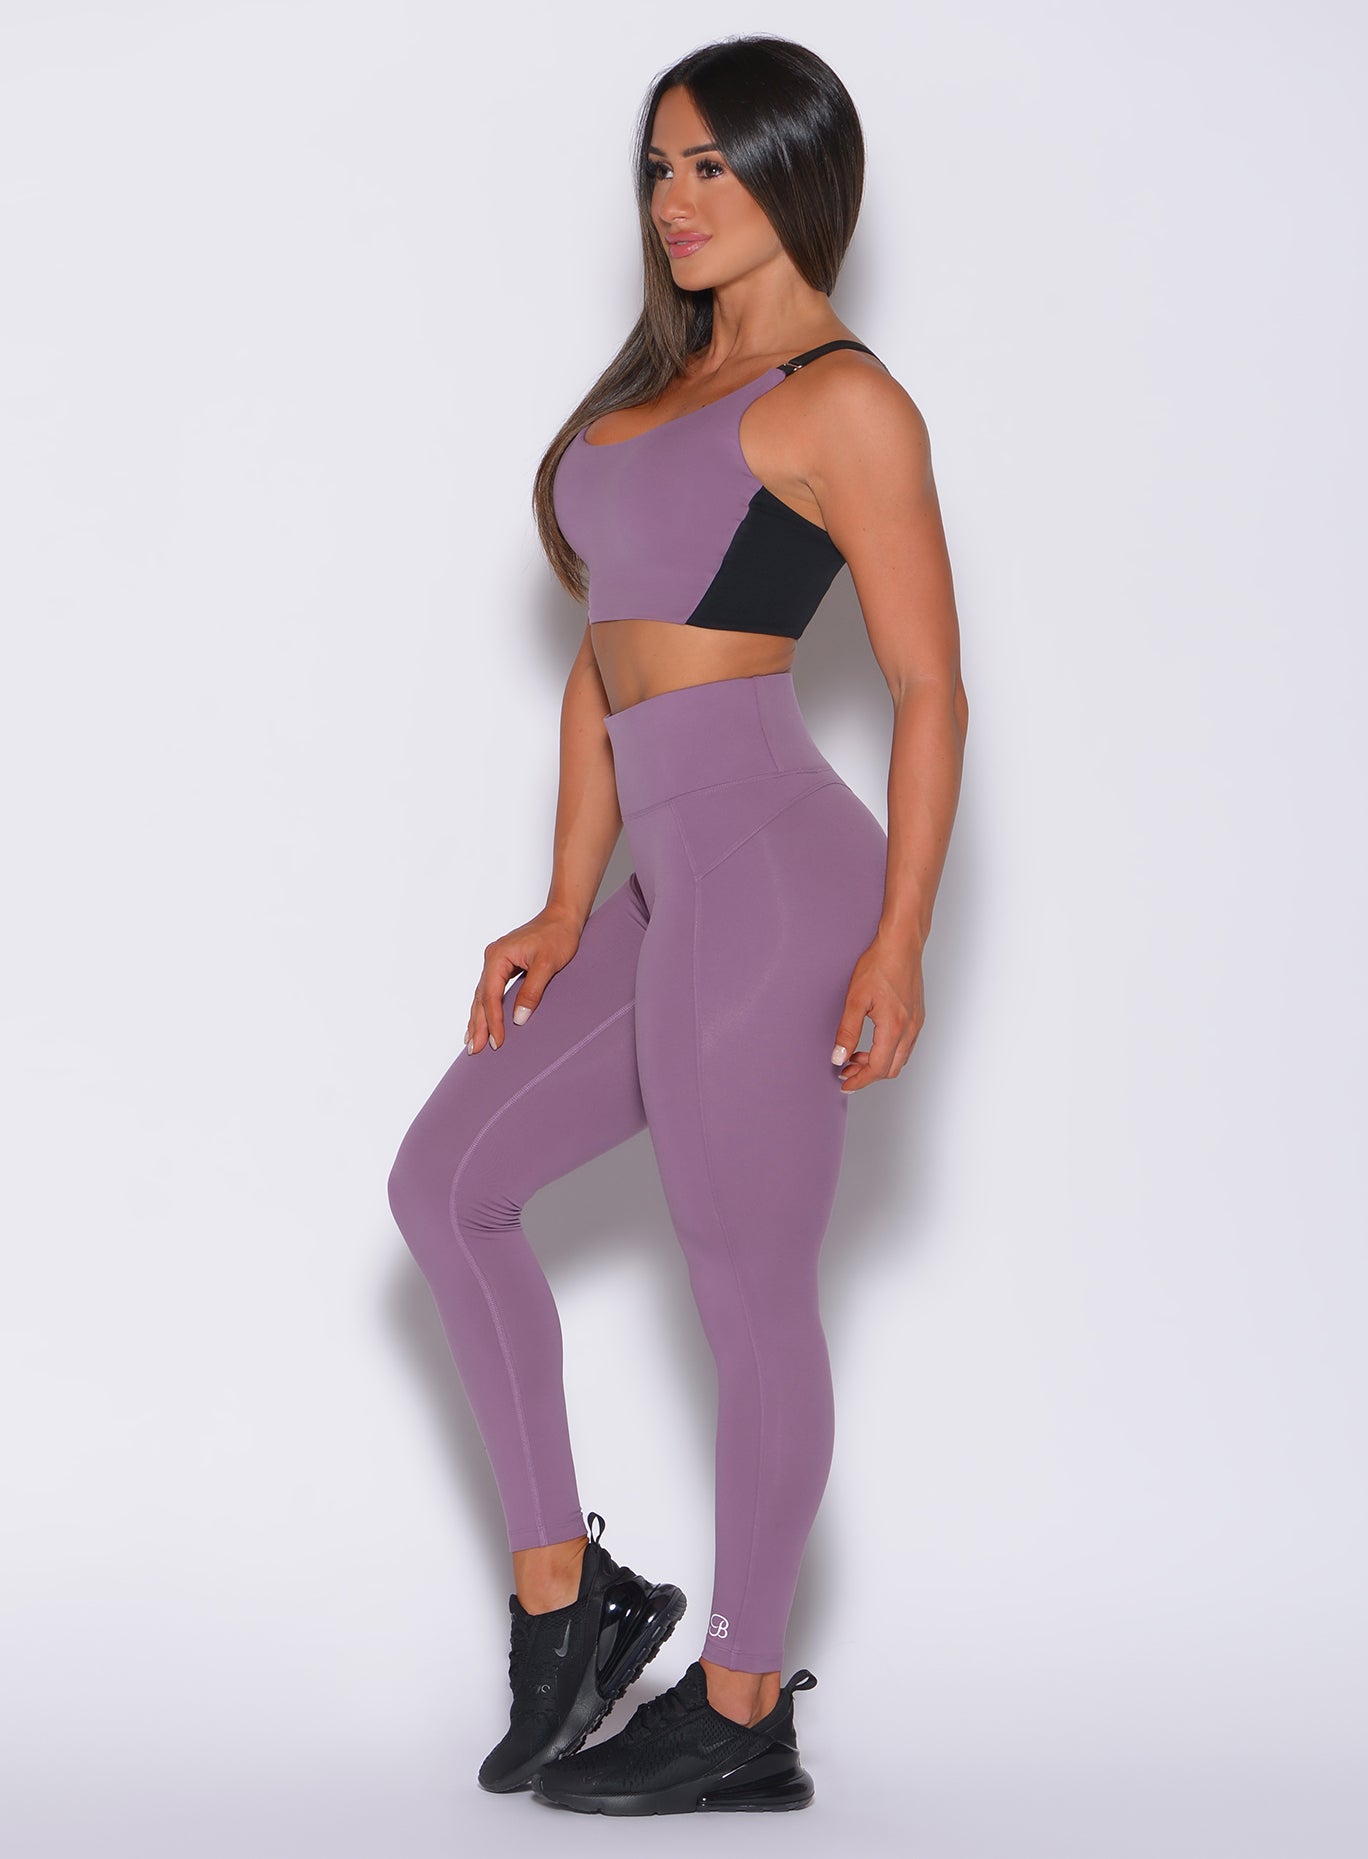 Left side profile view of a model in our snatched waist leggings in violet frost color and a matching sports bra